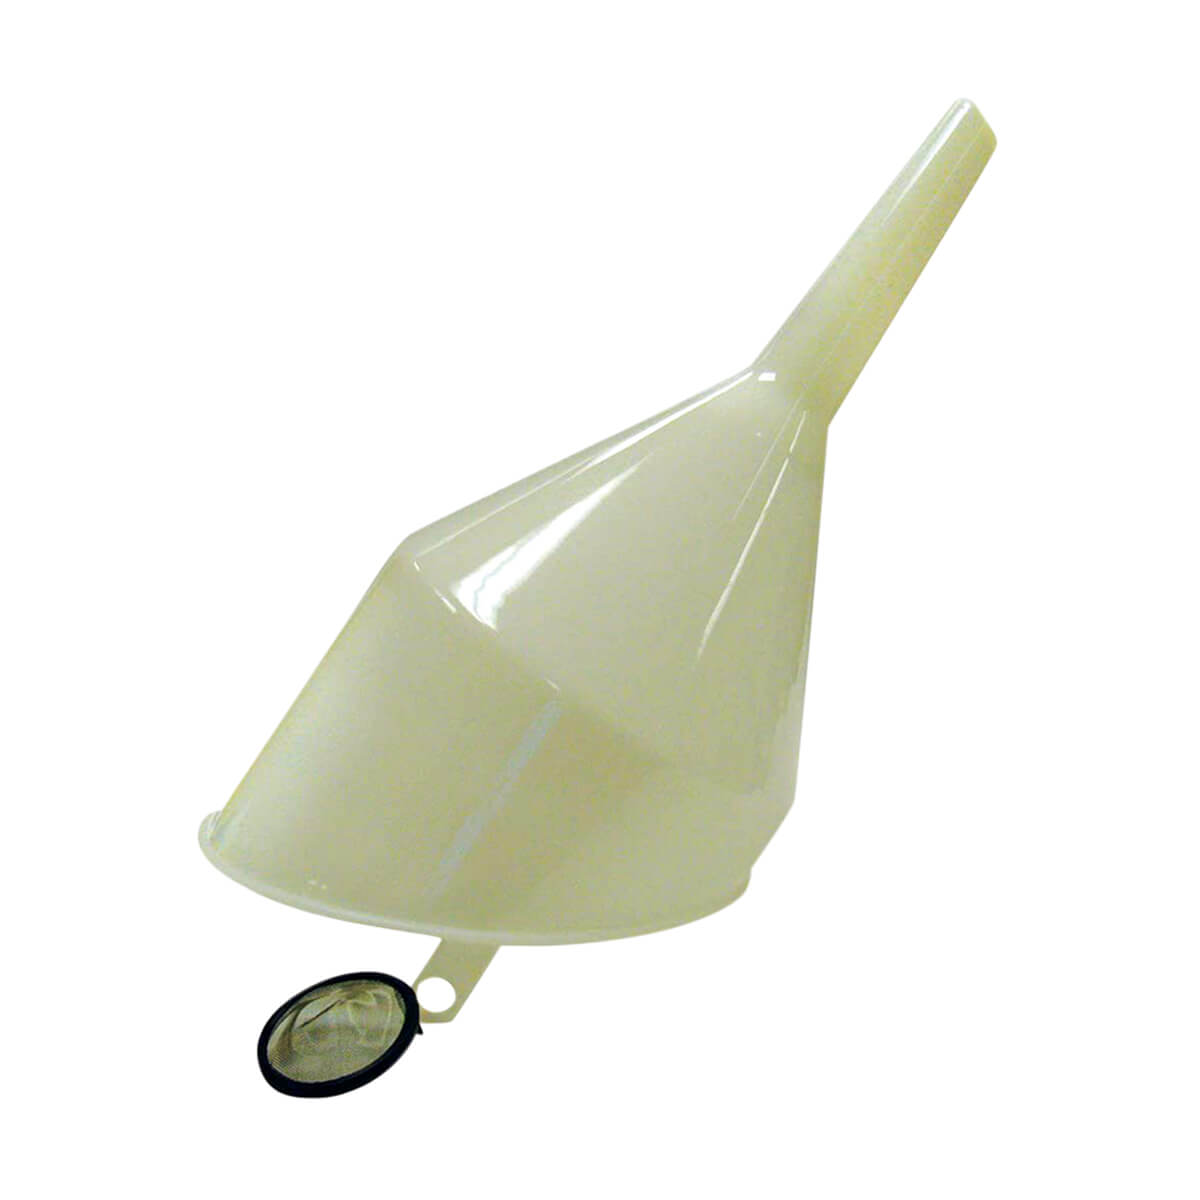 Automotive Funnel with Filter - 8-in Diameter - 3.5 L